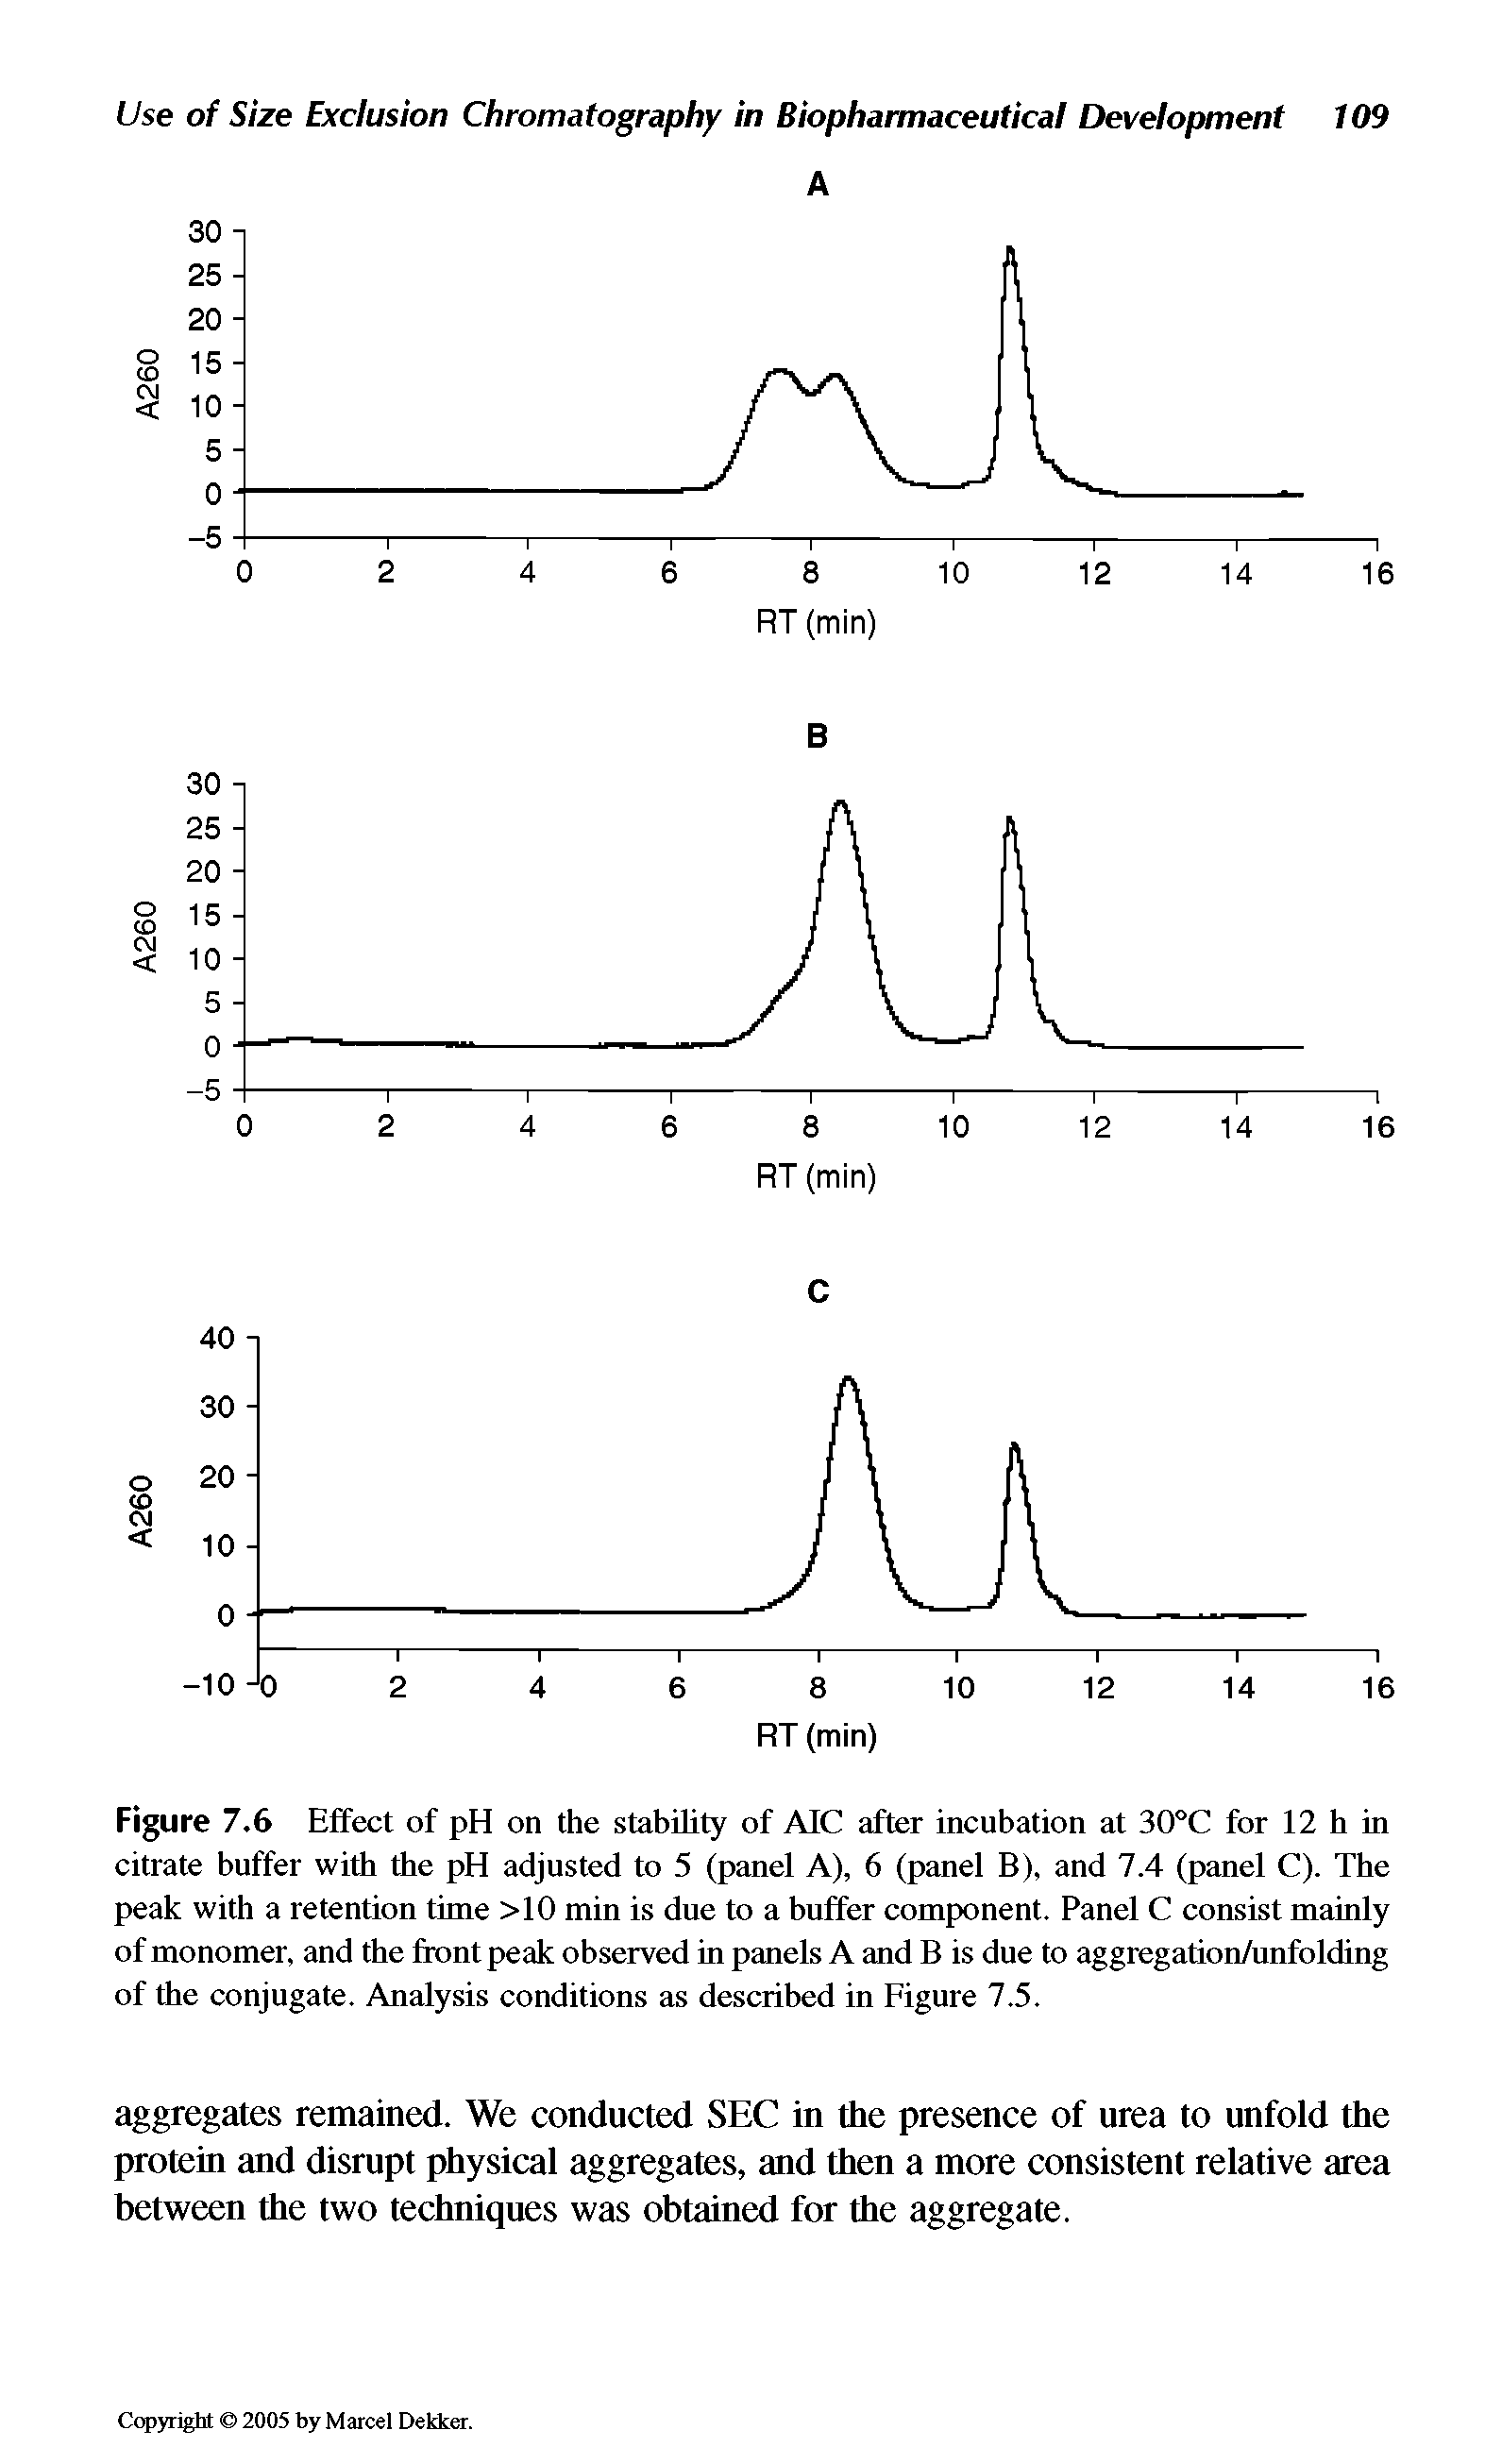 Figure 7.6 Effect of pH on the stability of AIC after incubation at 30°C for 12 h in citrate buffer with the pH adjusted to 5 (panel A), 6 (panel B), and 7.4 (panel C). The peak with a retention time >10 min is due to a buffer component. Panel C consist mainly of monomer, and the front peak observed in panels A and B is due to aggregation/unfolding of the conjugate. Analysis conditions as described in Figure 7.5.